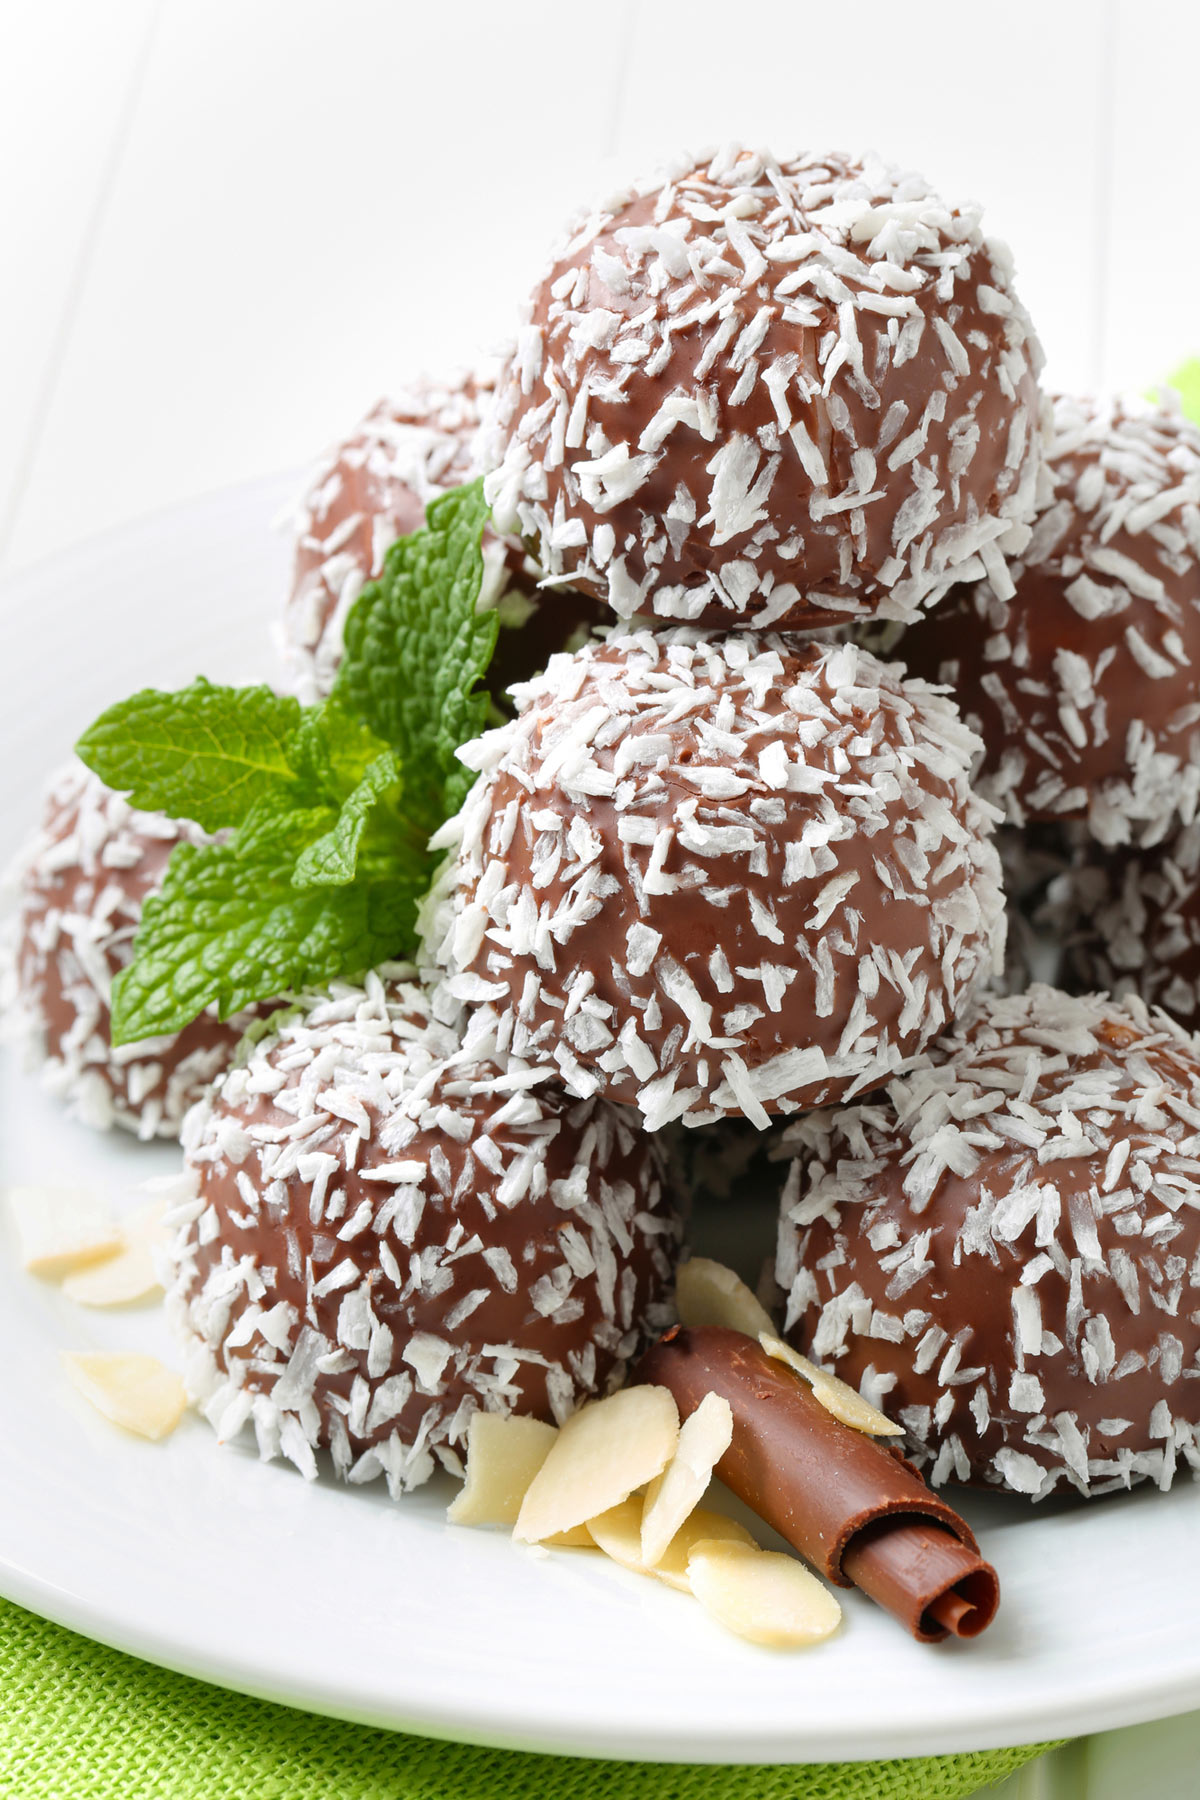 My Favorite Snack For Weight Loss, Energy, and Vitality – Protein Balls